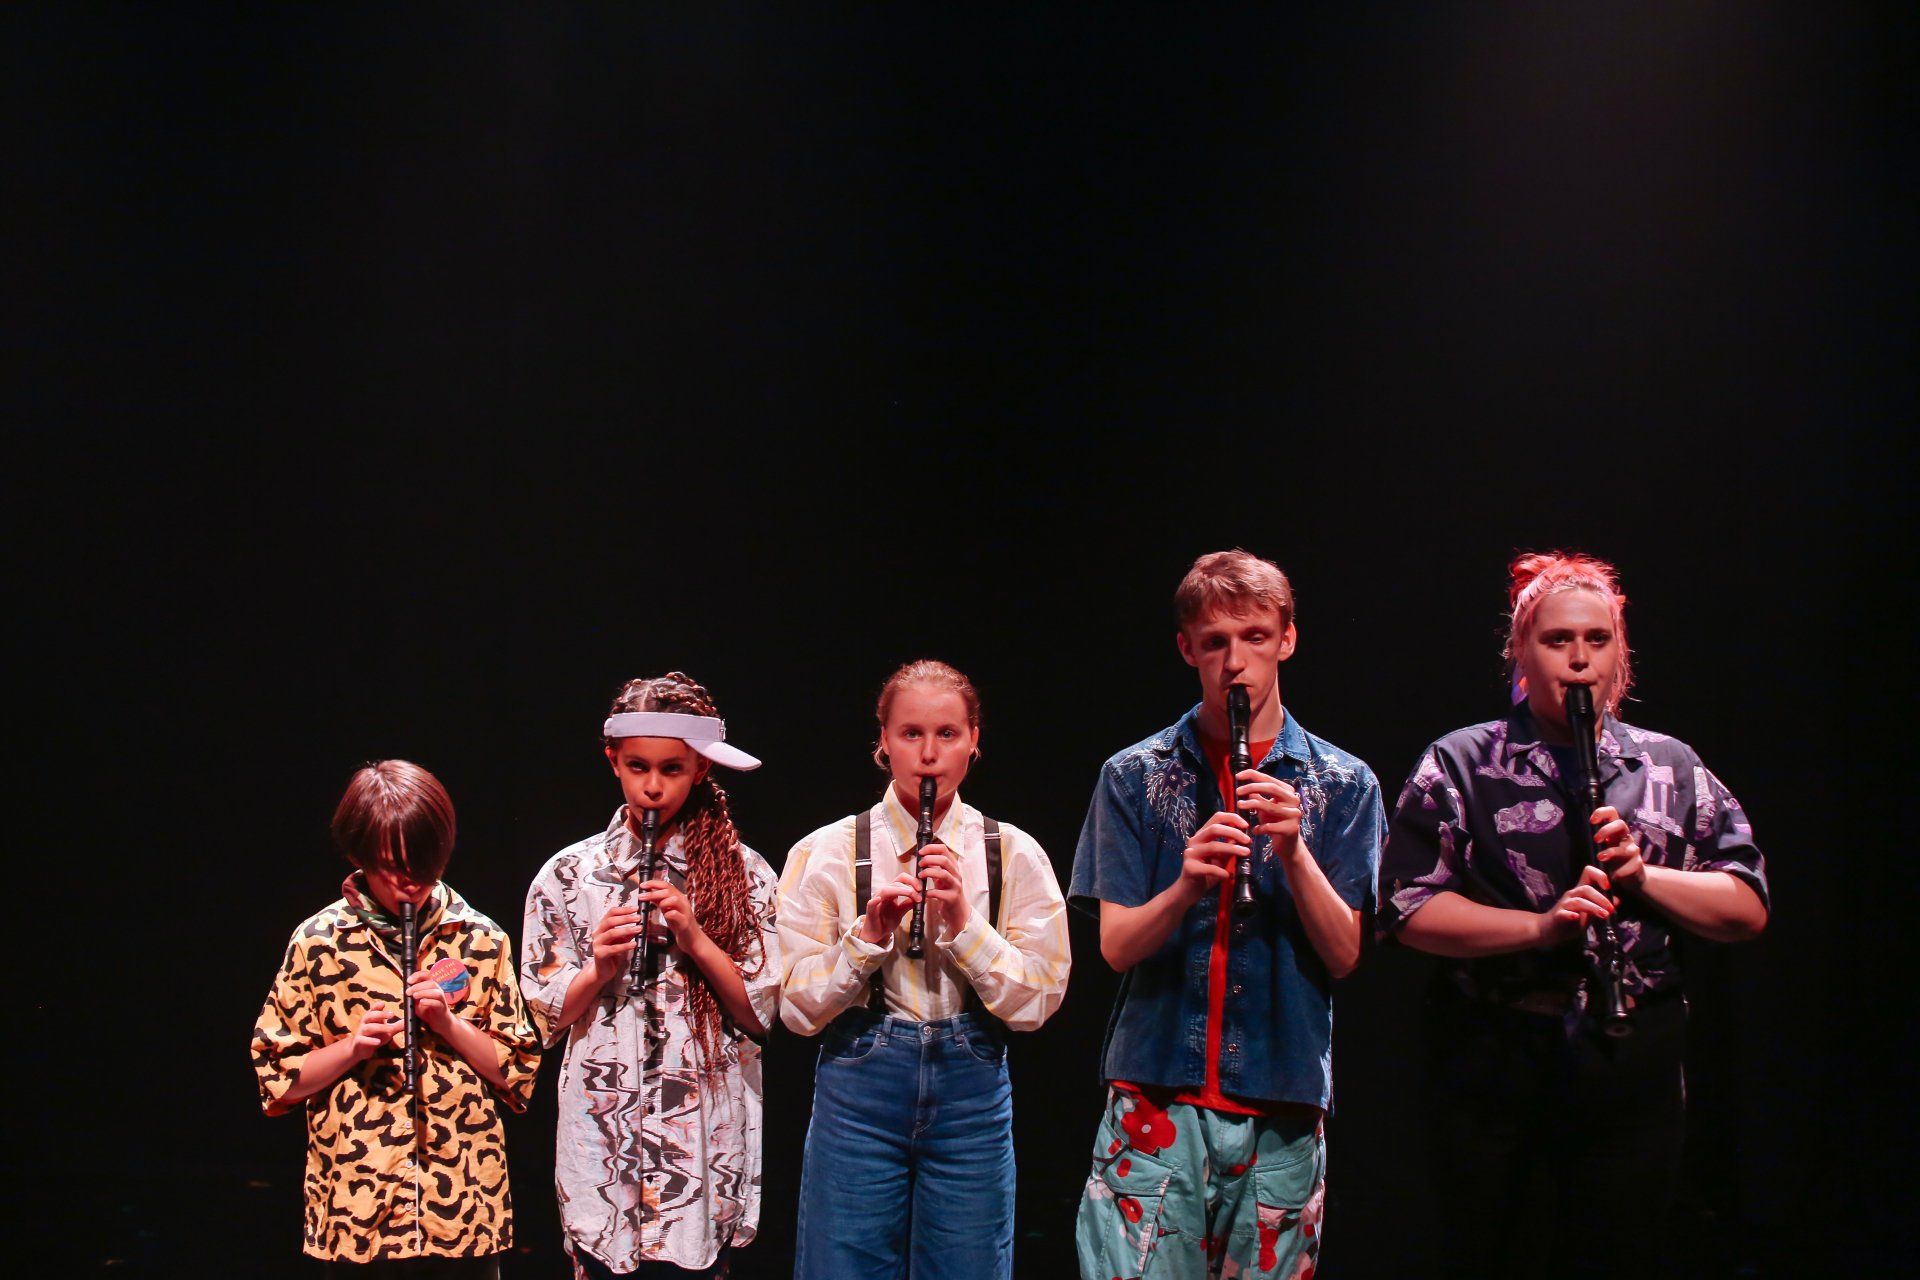 a group of young people are standing next to each other on a stage playing recorders .